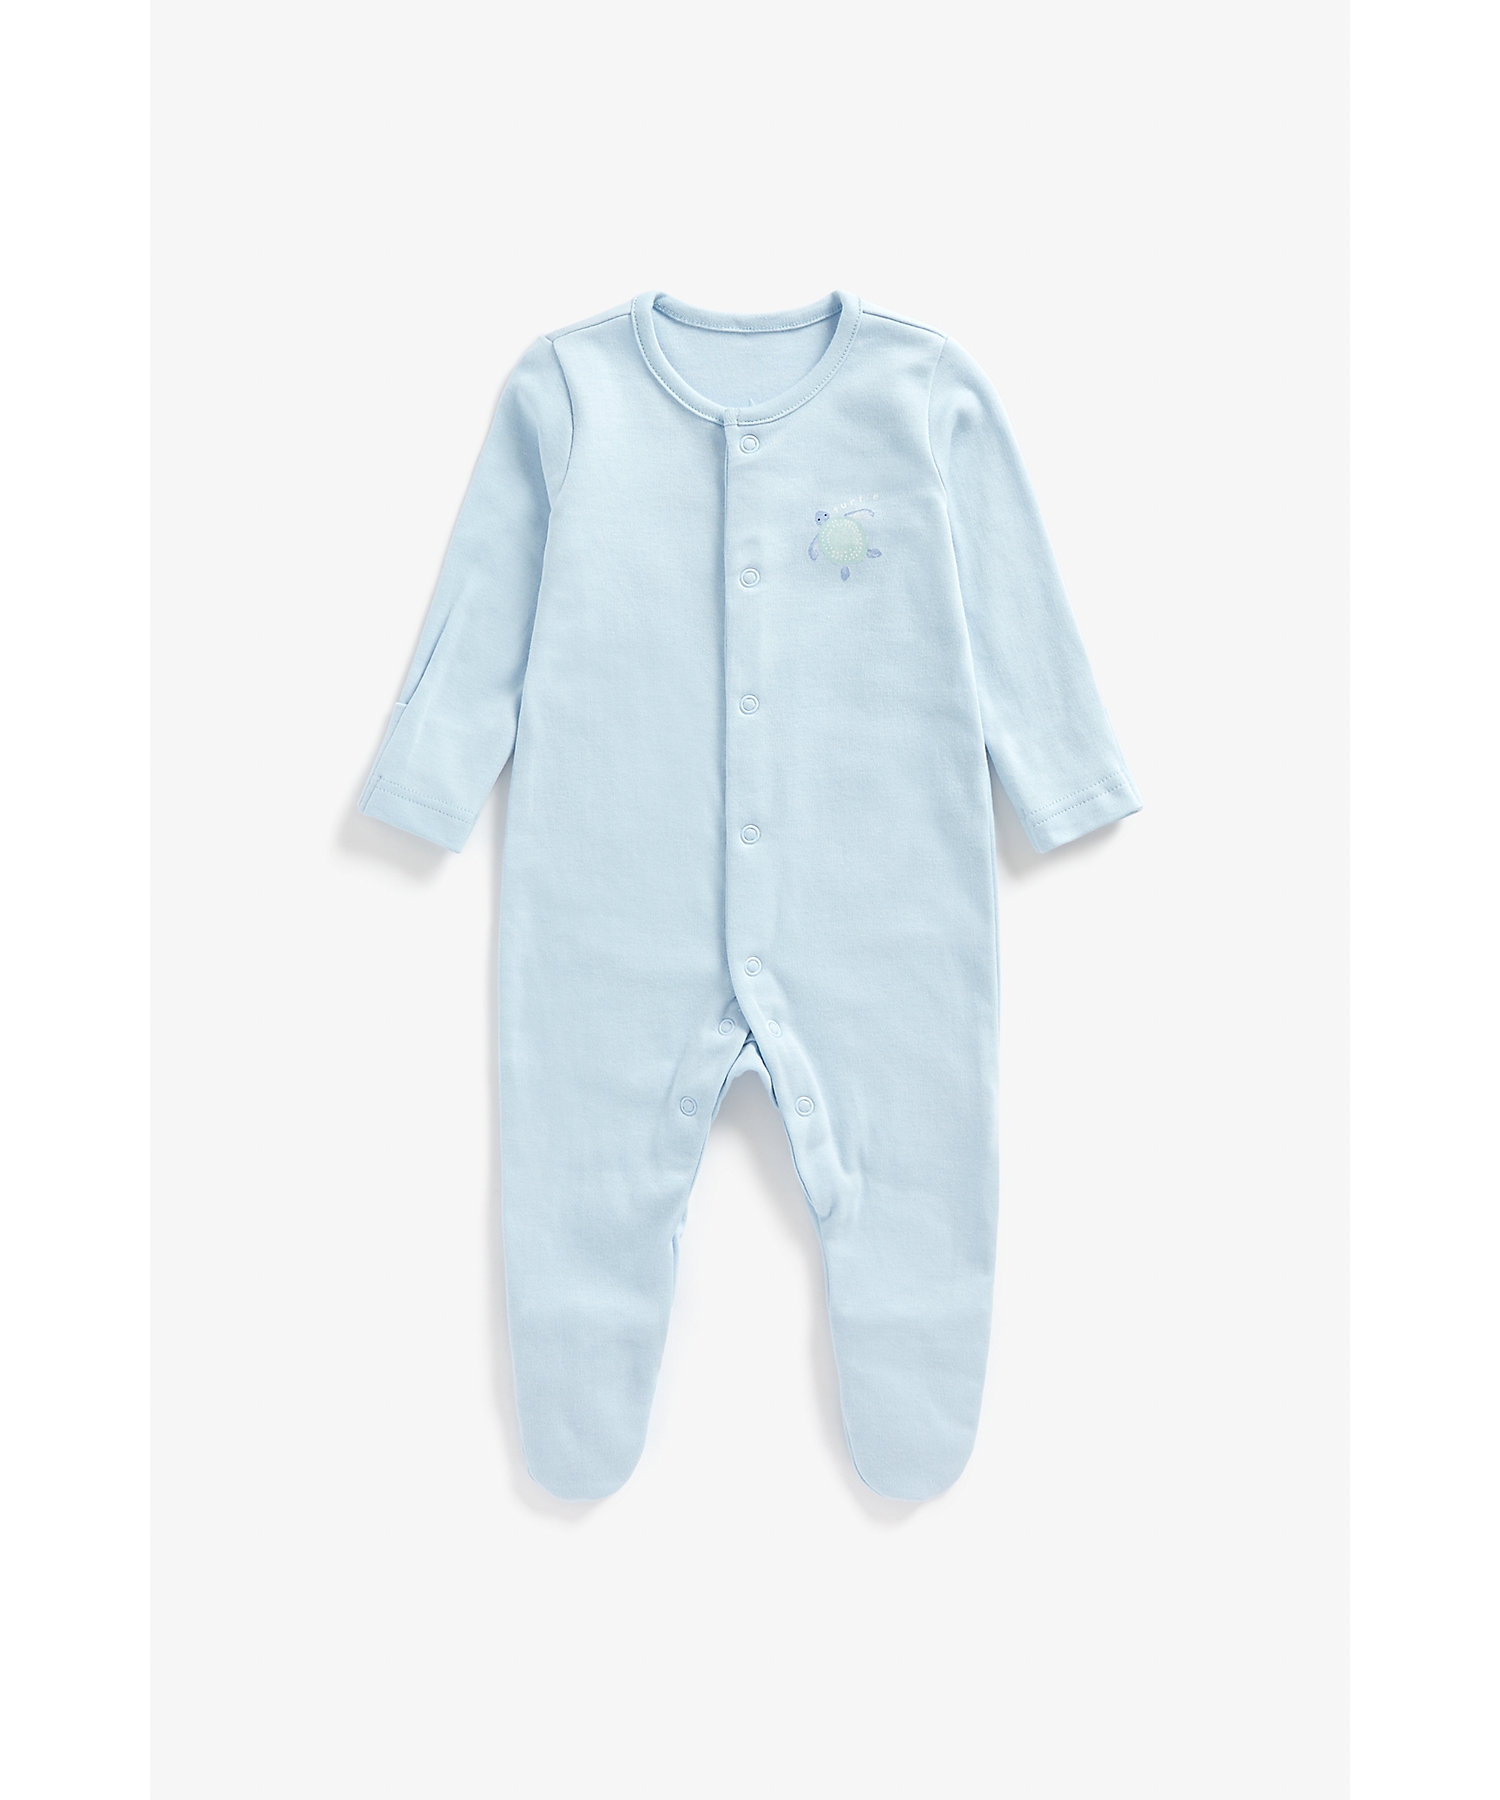 Mothercare | Boys Full Sleeves Sleepsuits -Pack of 3-Multicolor 3